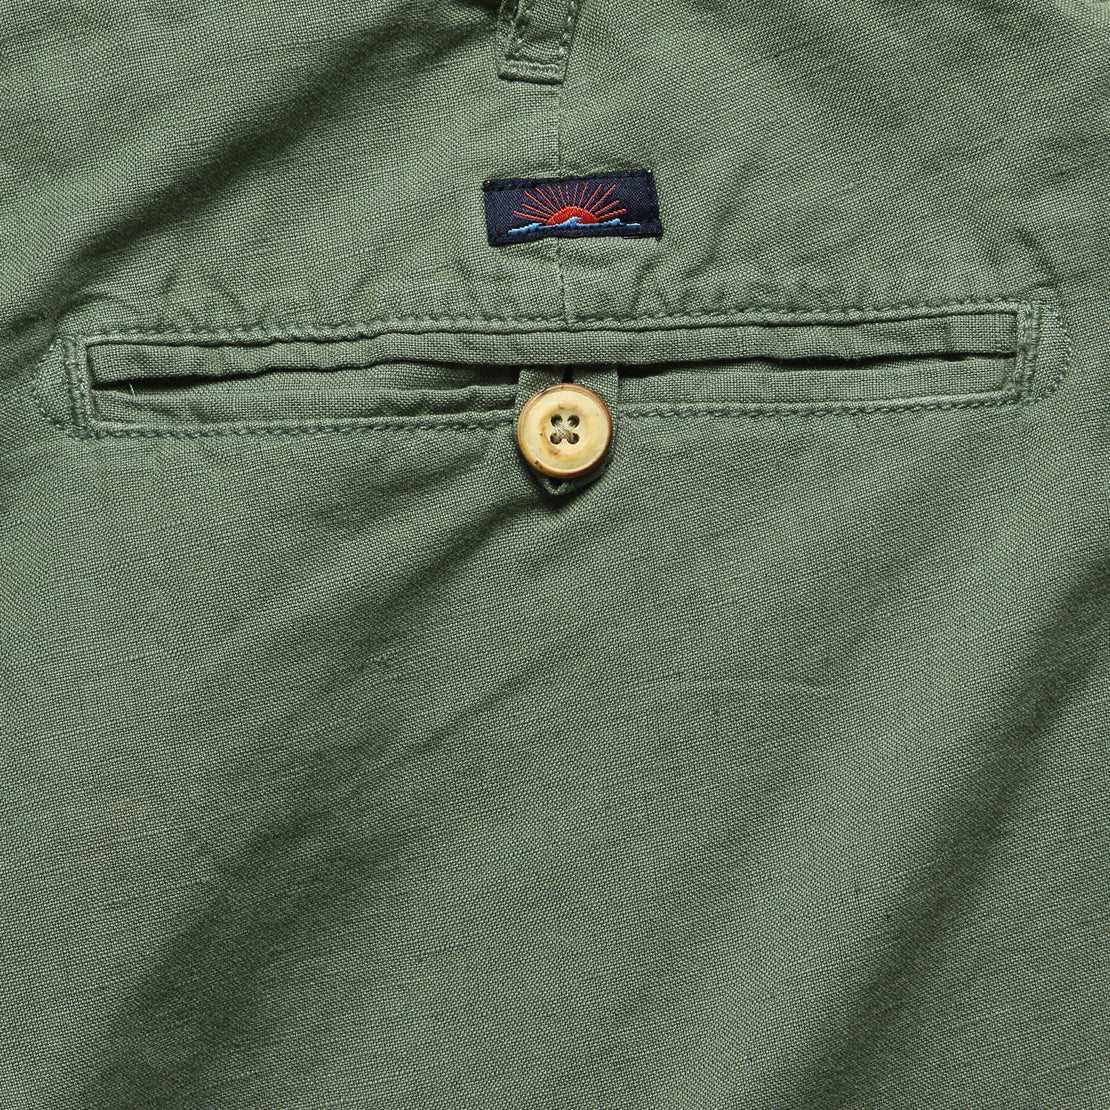 Malibu Short - Summer Olive - Faherty - STAG Provisions - Shorts - Solid